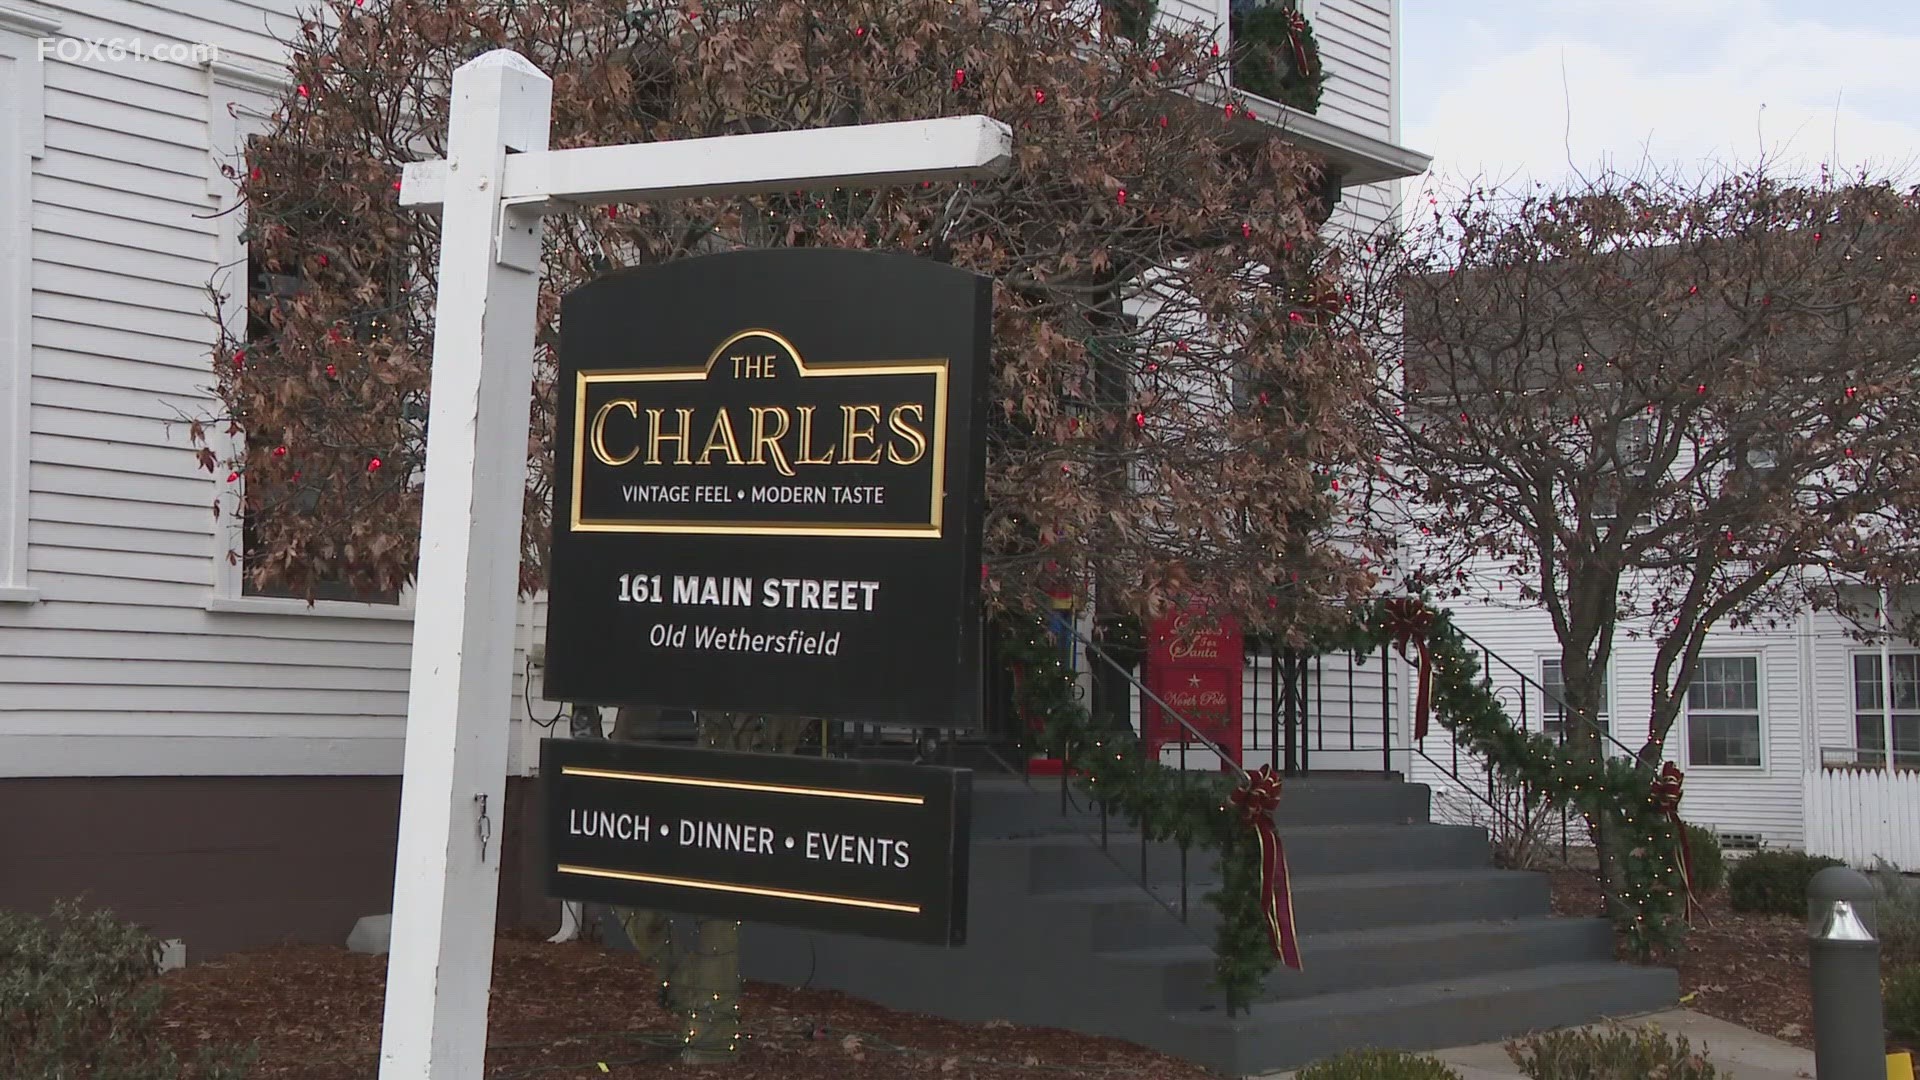 The Charles in Wethersfield will be honored as well as 1,400 industry professionals.